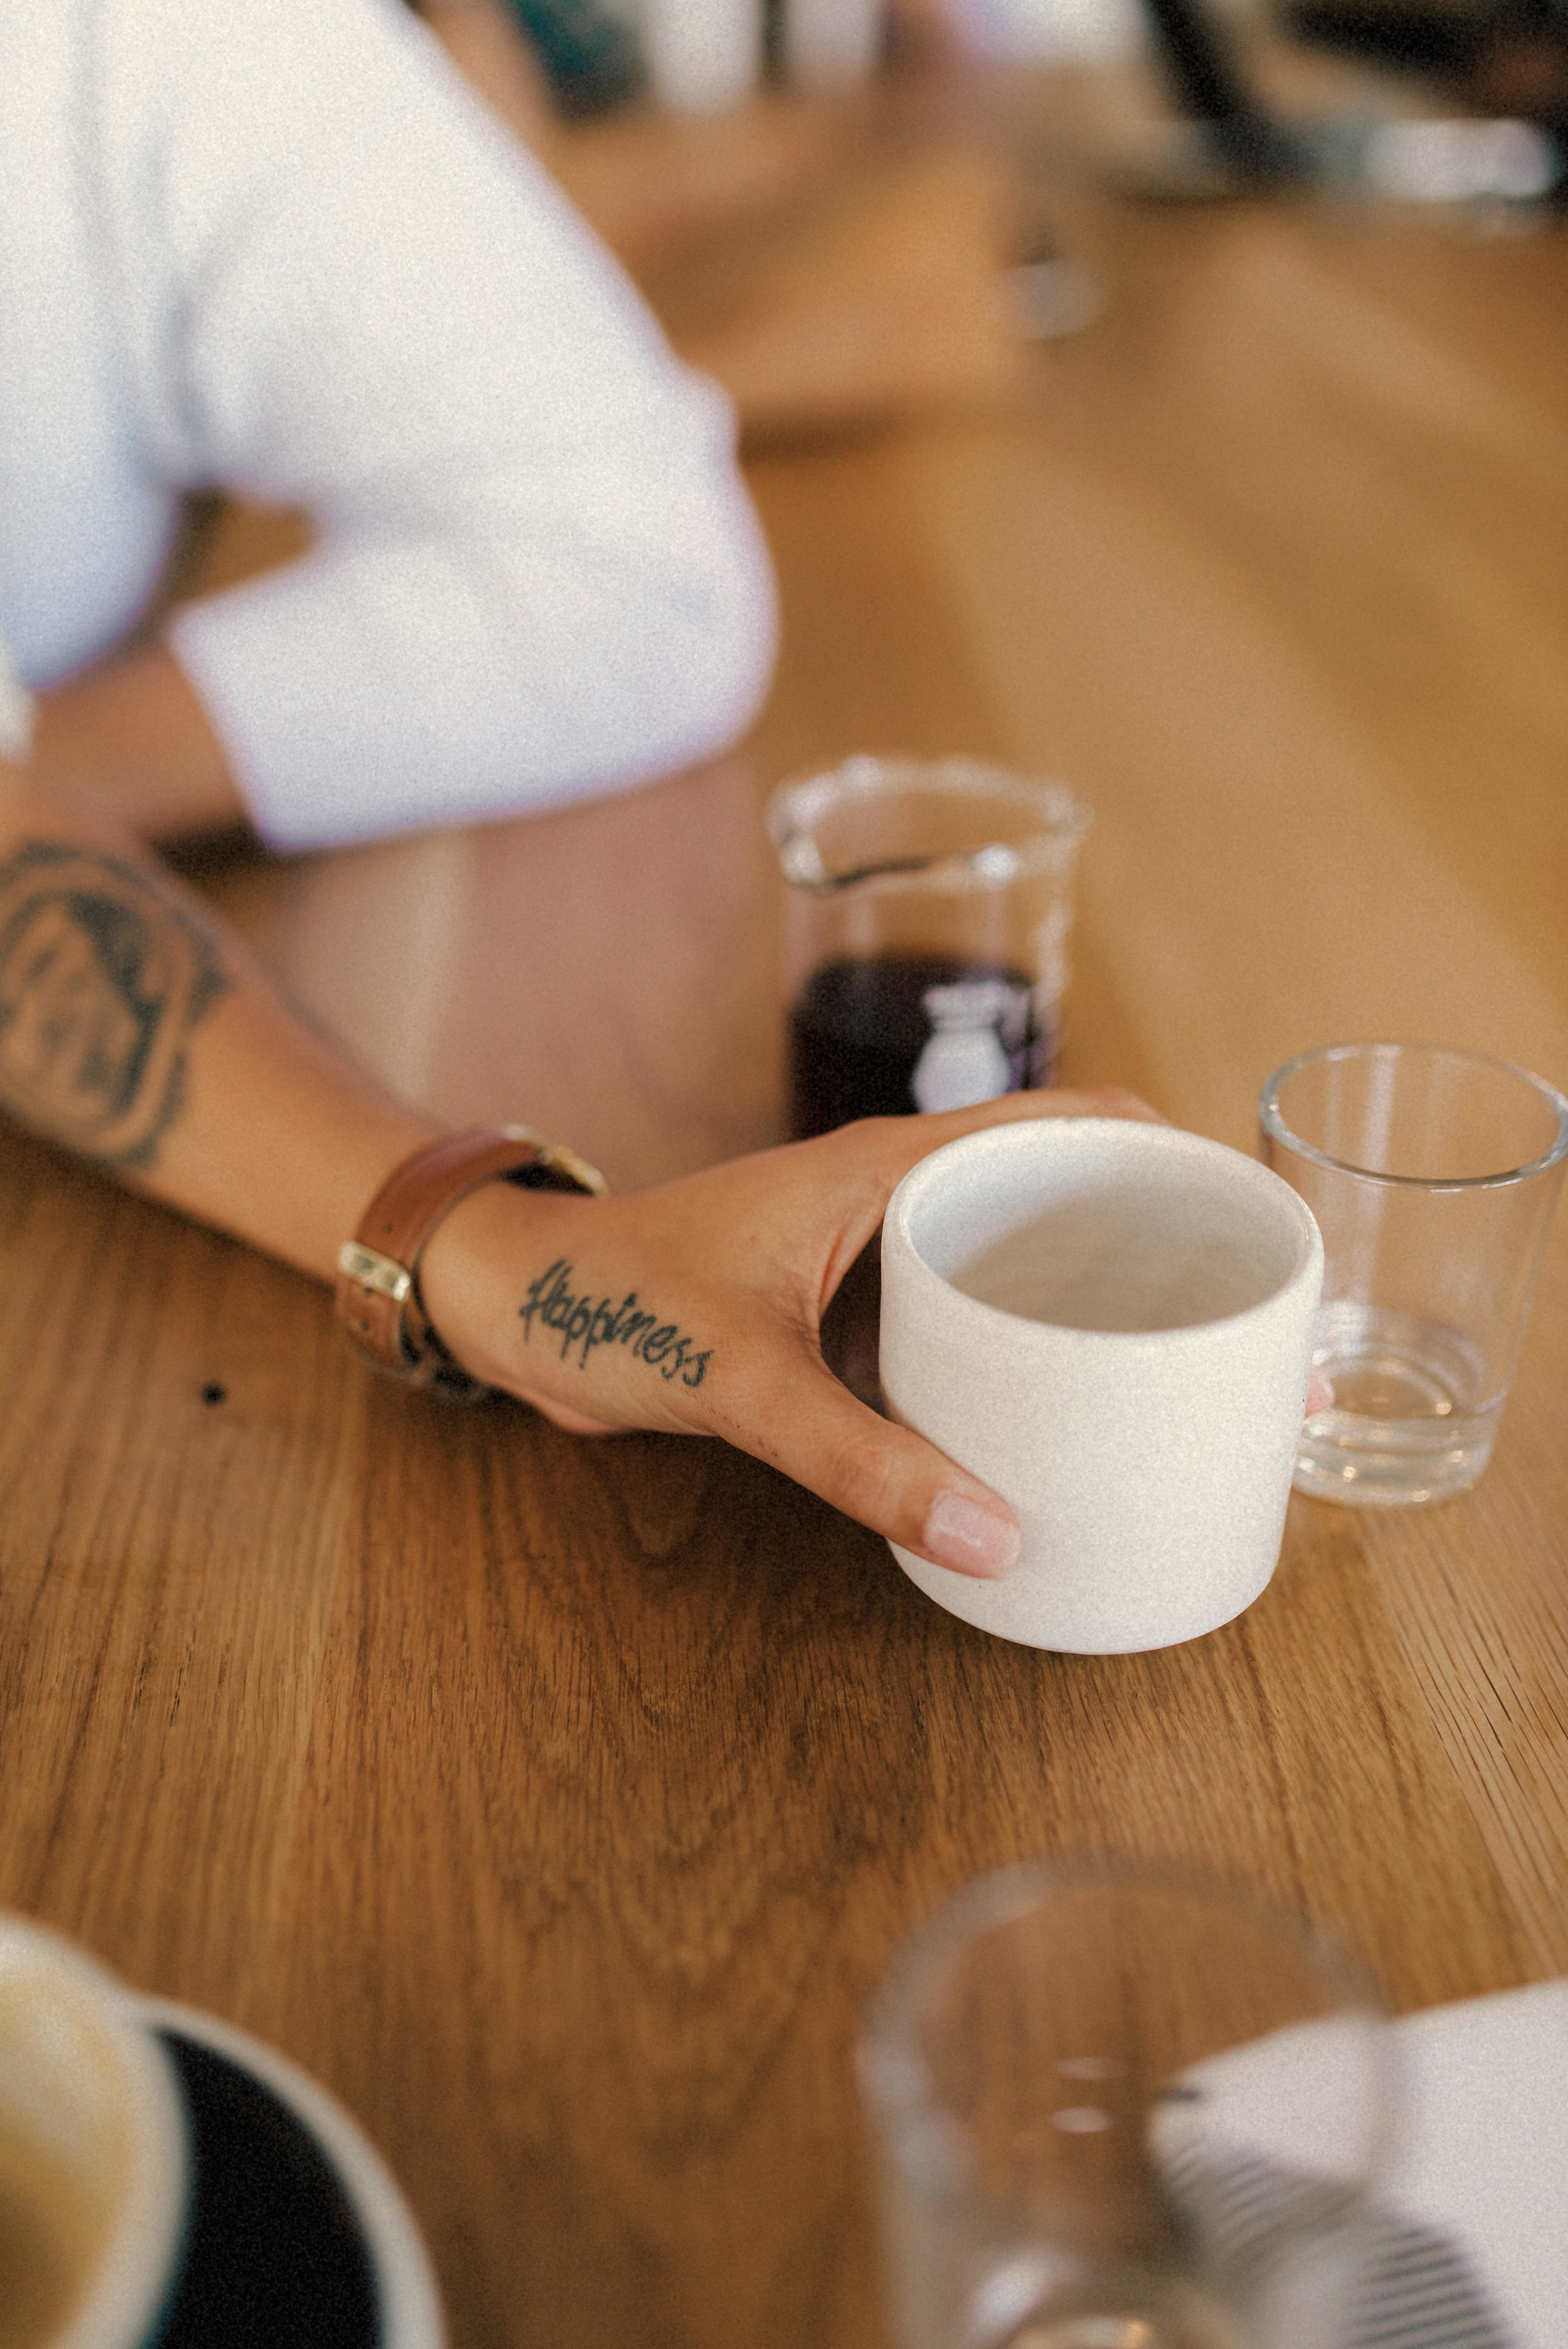 a tattoo on Hillary's hand as she reaches for her coffee - Bandit Coffee - St Pete Florida - Naples Florida Wedding Photographer - Tampa Wedding Photographer